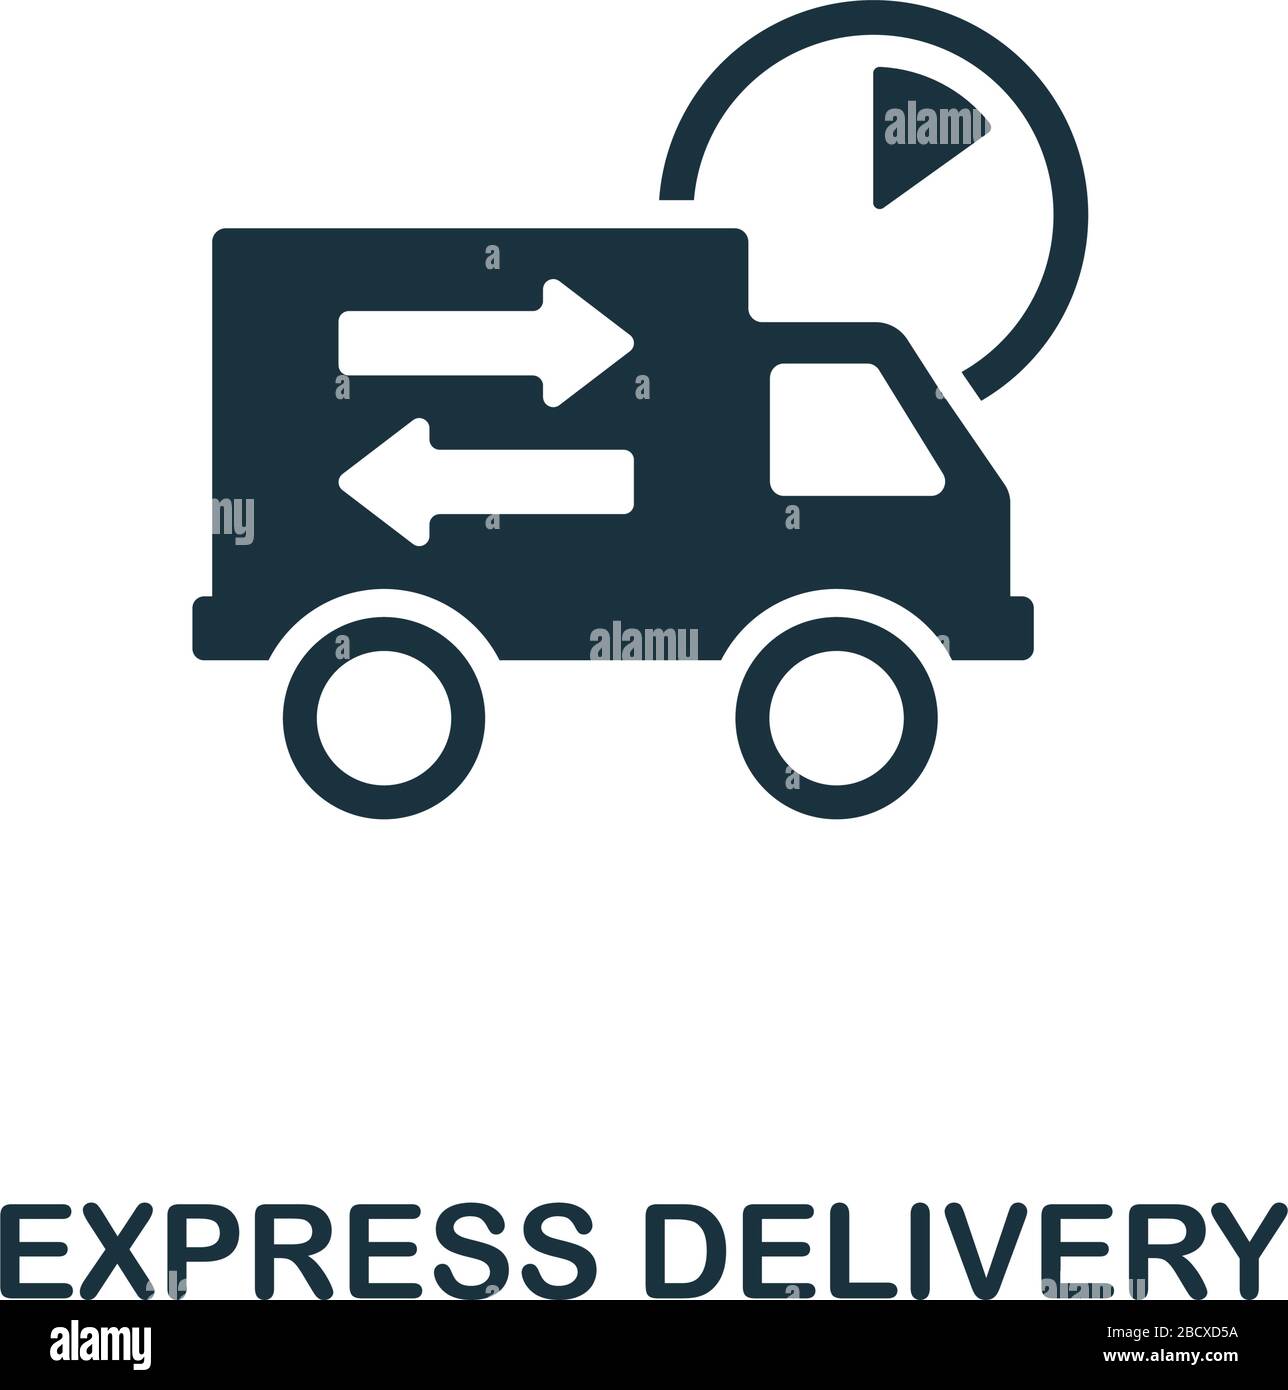 https://c8.alamy.com/comp/2BCXD5A/express-delivery-icon-simple-illustration-from-cargo-collection-creative-express-delivery-icon-for-web-design-templates-infographics-and-more-2BCXD5A.jpg